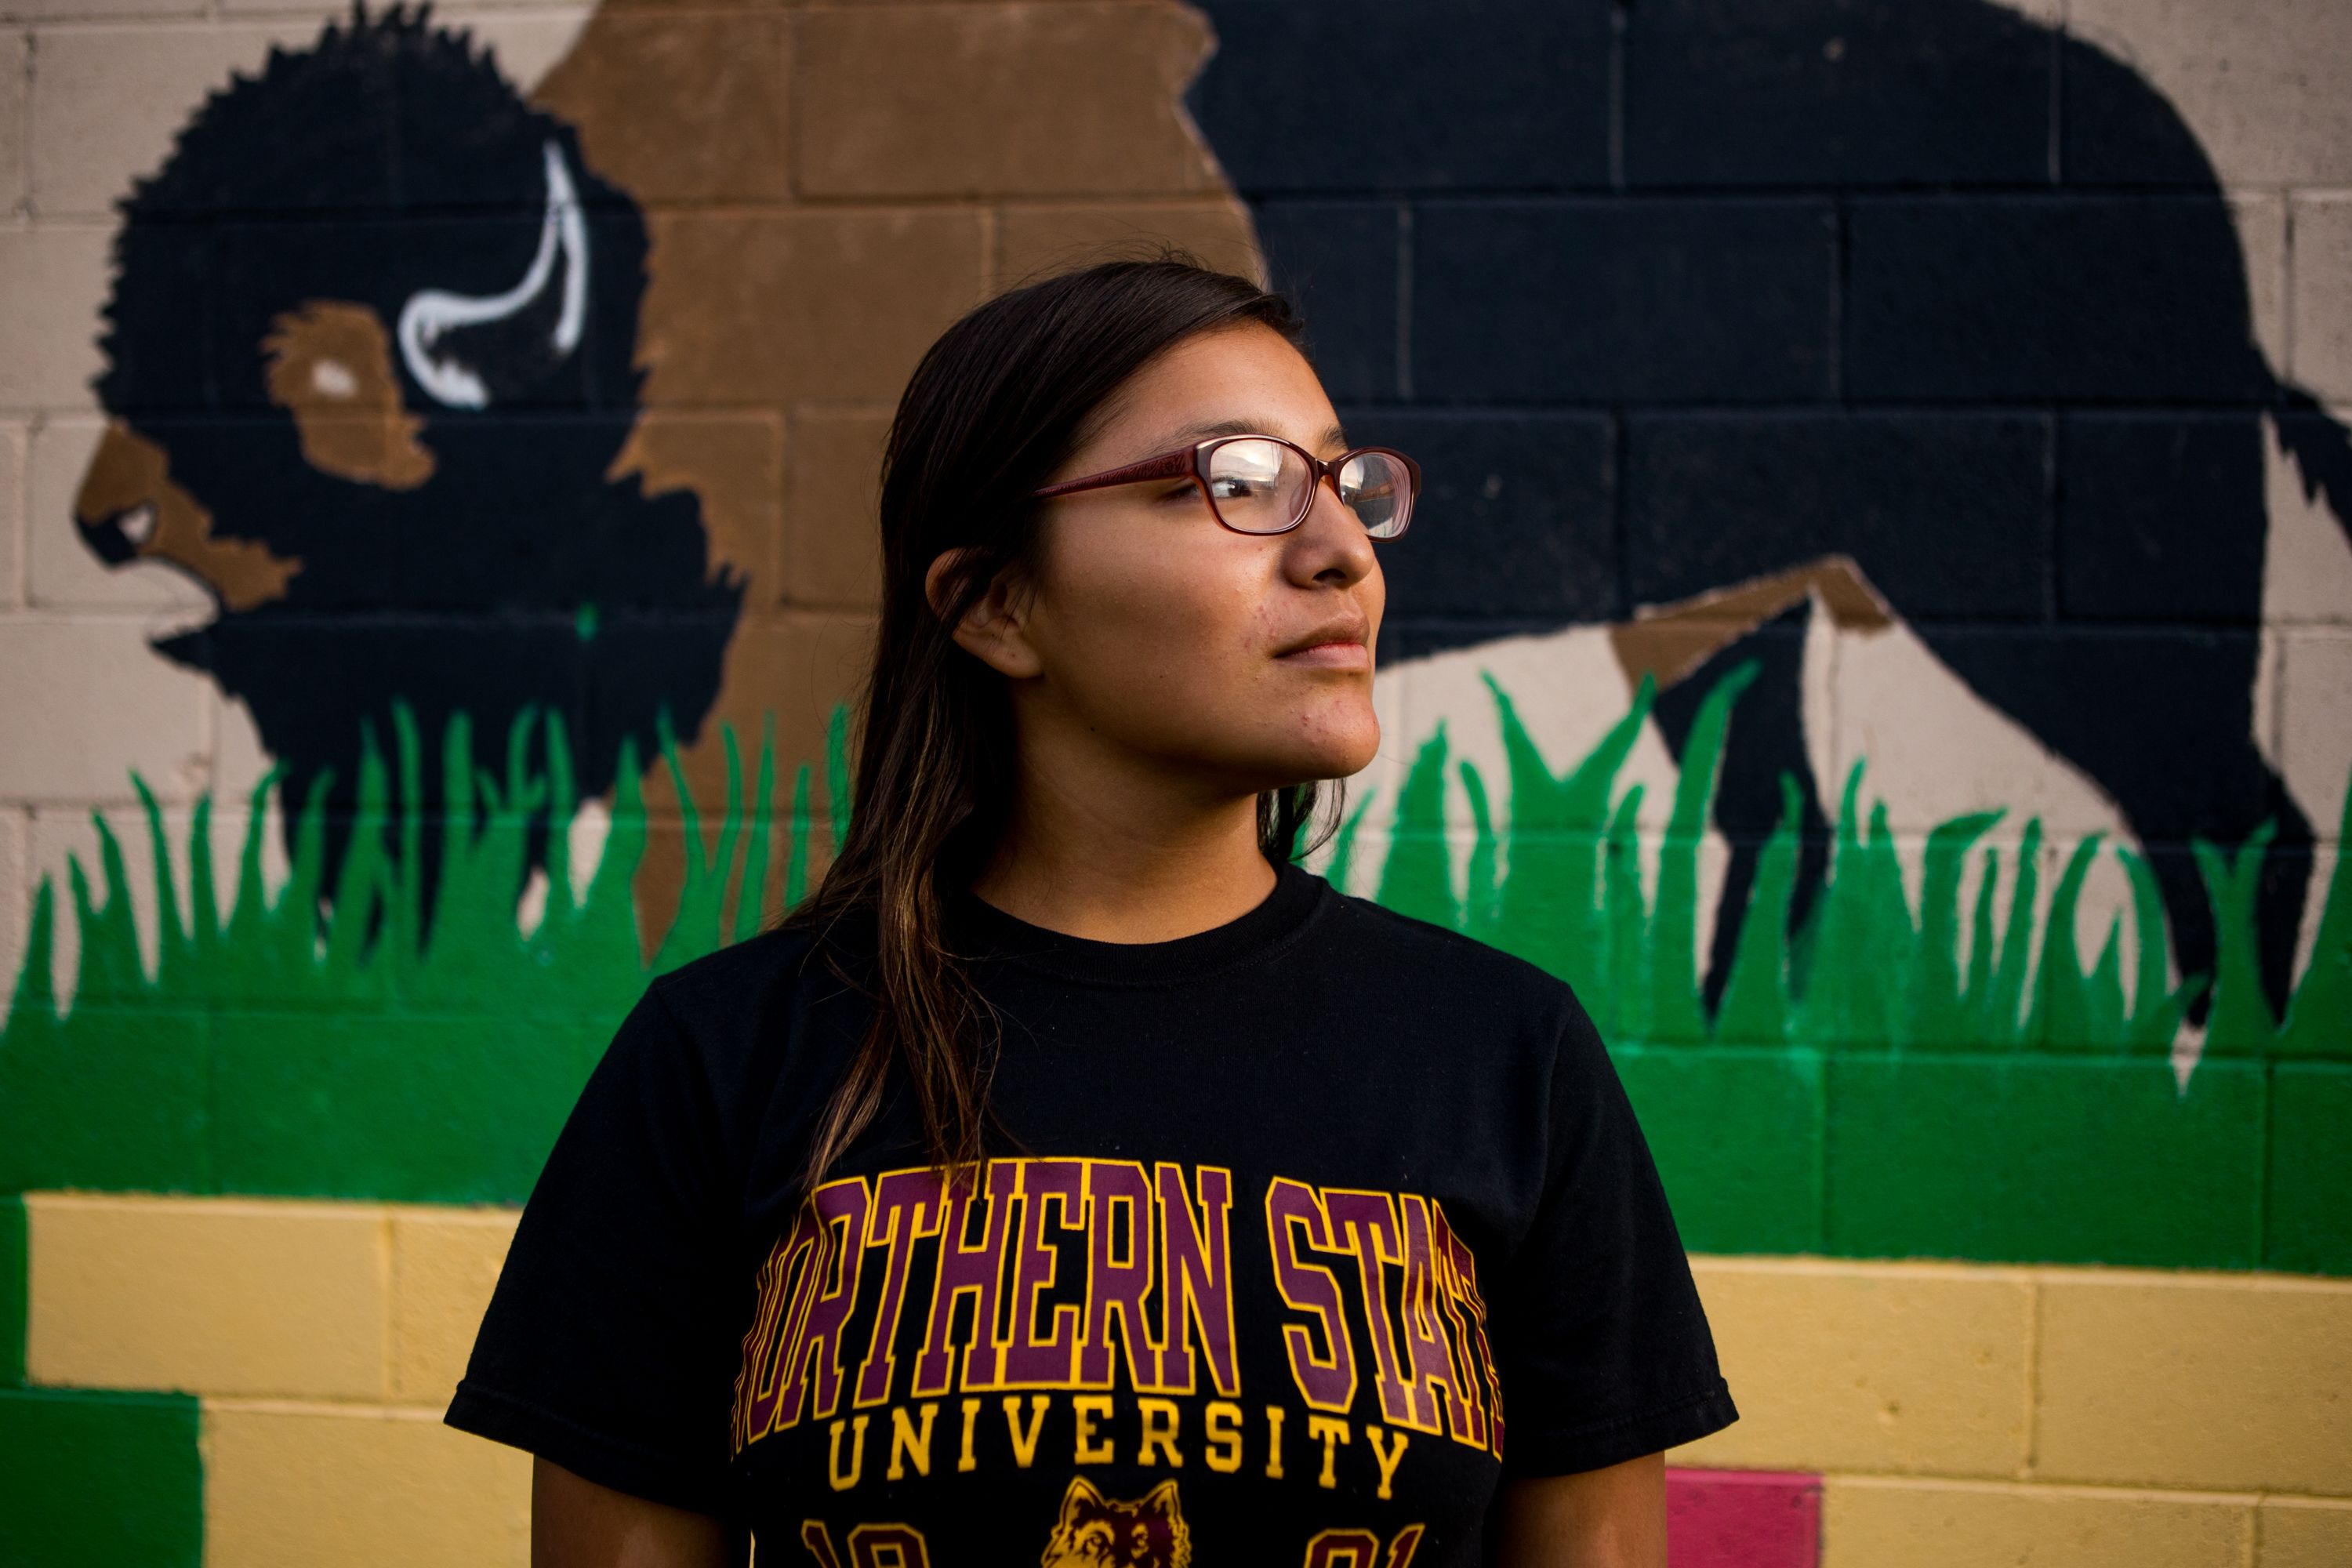 Tianni Arrow, 17, of Norris, South Dakota poses for a portrait on September 1, 2018, in downtown Mission, South Dakota. Arrow, a senior at Todd County High School, is one of 102 students to graduate from the high school this year—the first group to graduate a class of over 100 students in the history of the institution. Image by Brian Munoz. South Dakota, 2018.